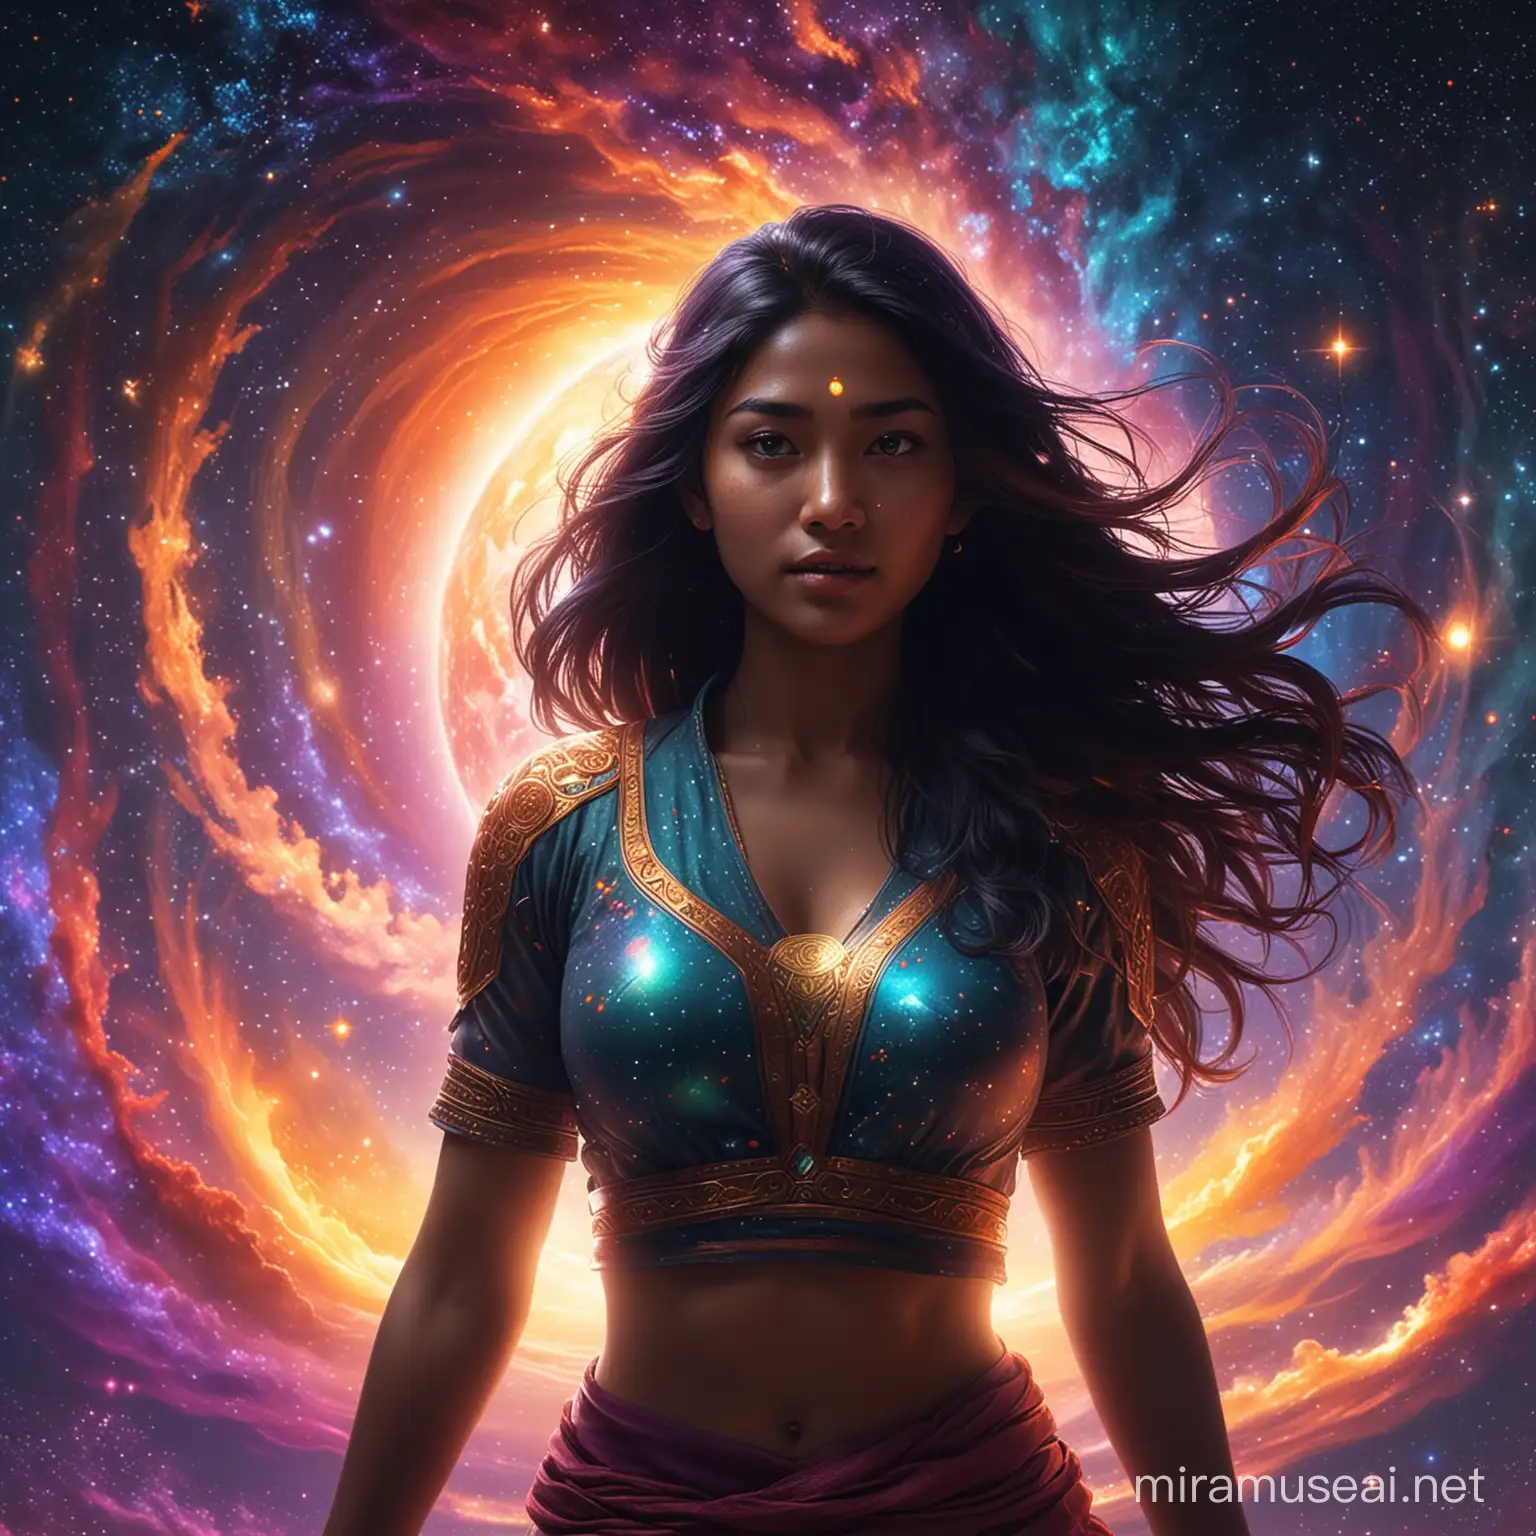 a person mix asian indian increasing Vibration & experiencing Uncover Underlying Beliefs, and being surrounded by beautiful colors, universe or galaxy imagination. backlight photography, CG characters, 32K, high resolution, super-realistic